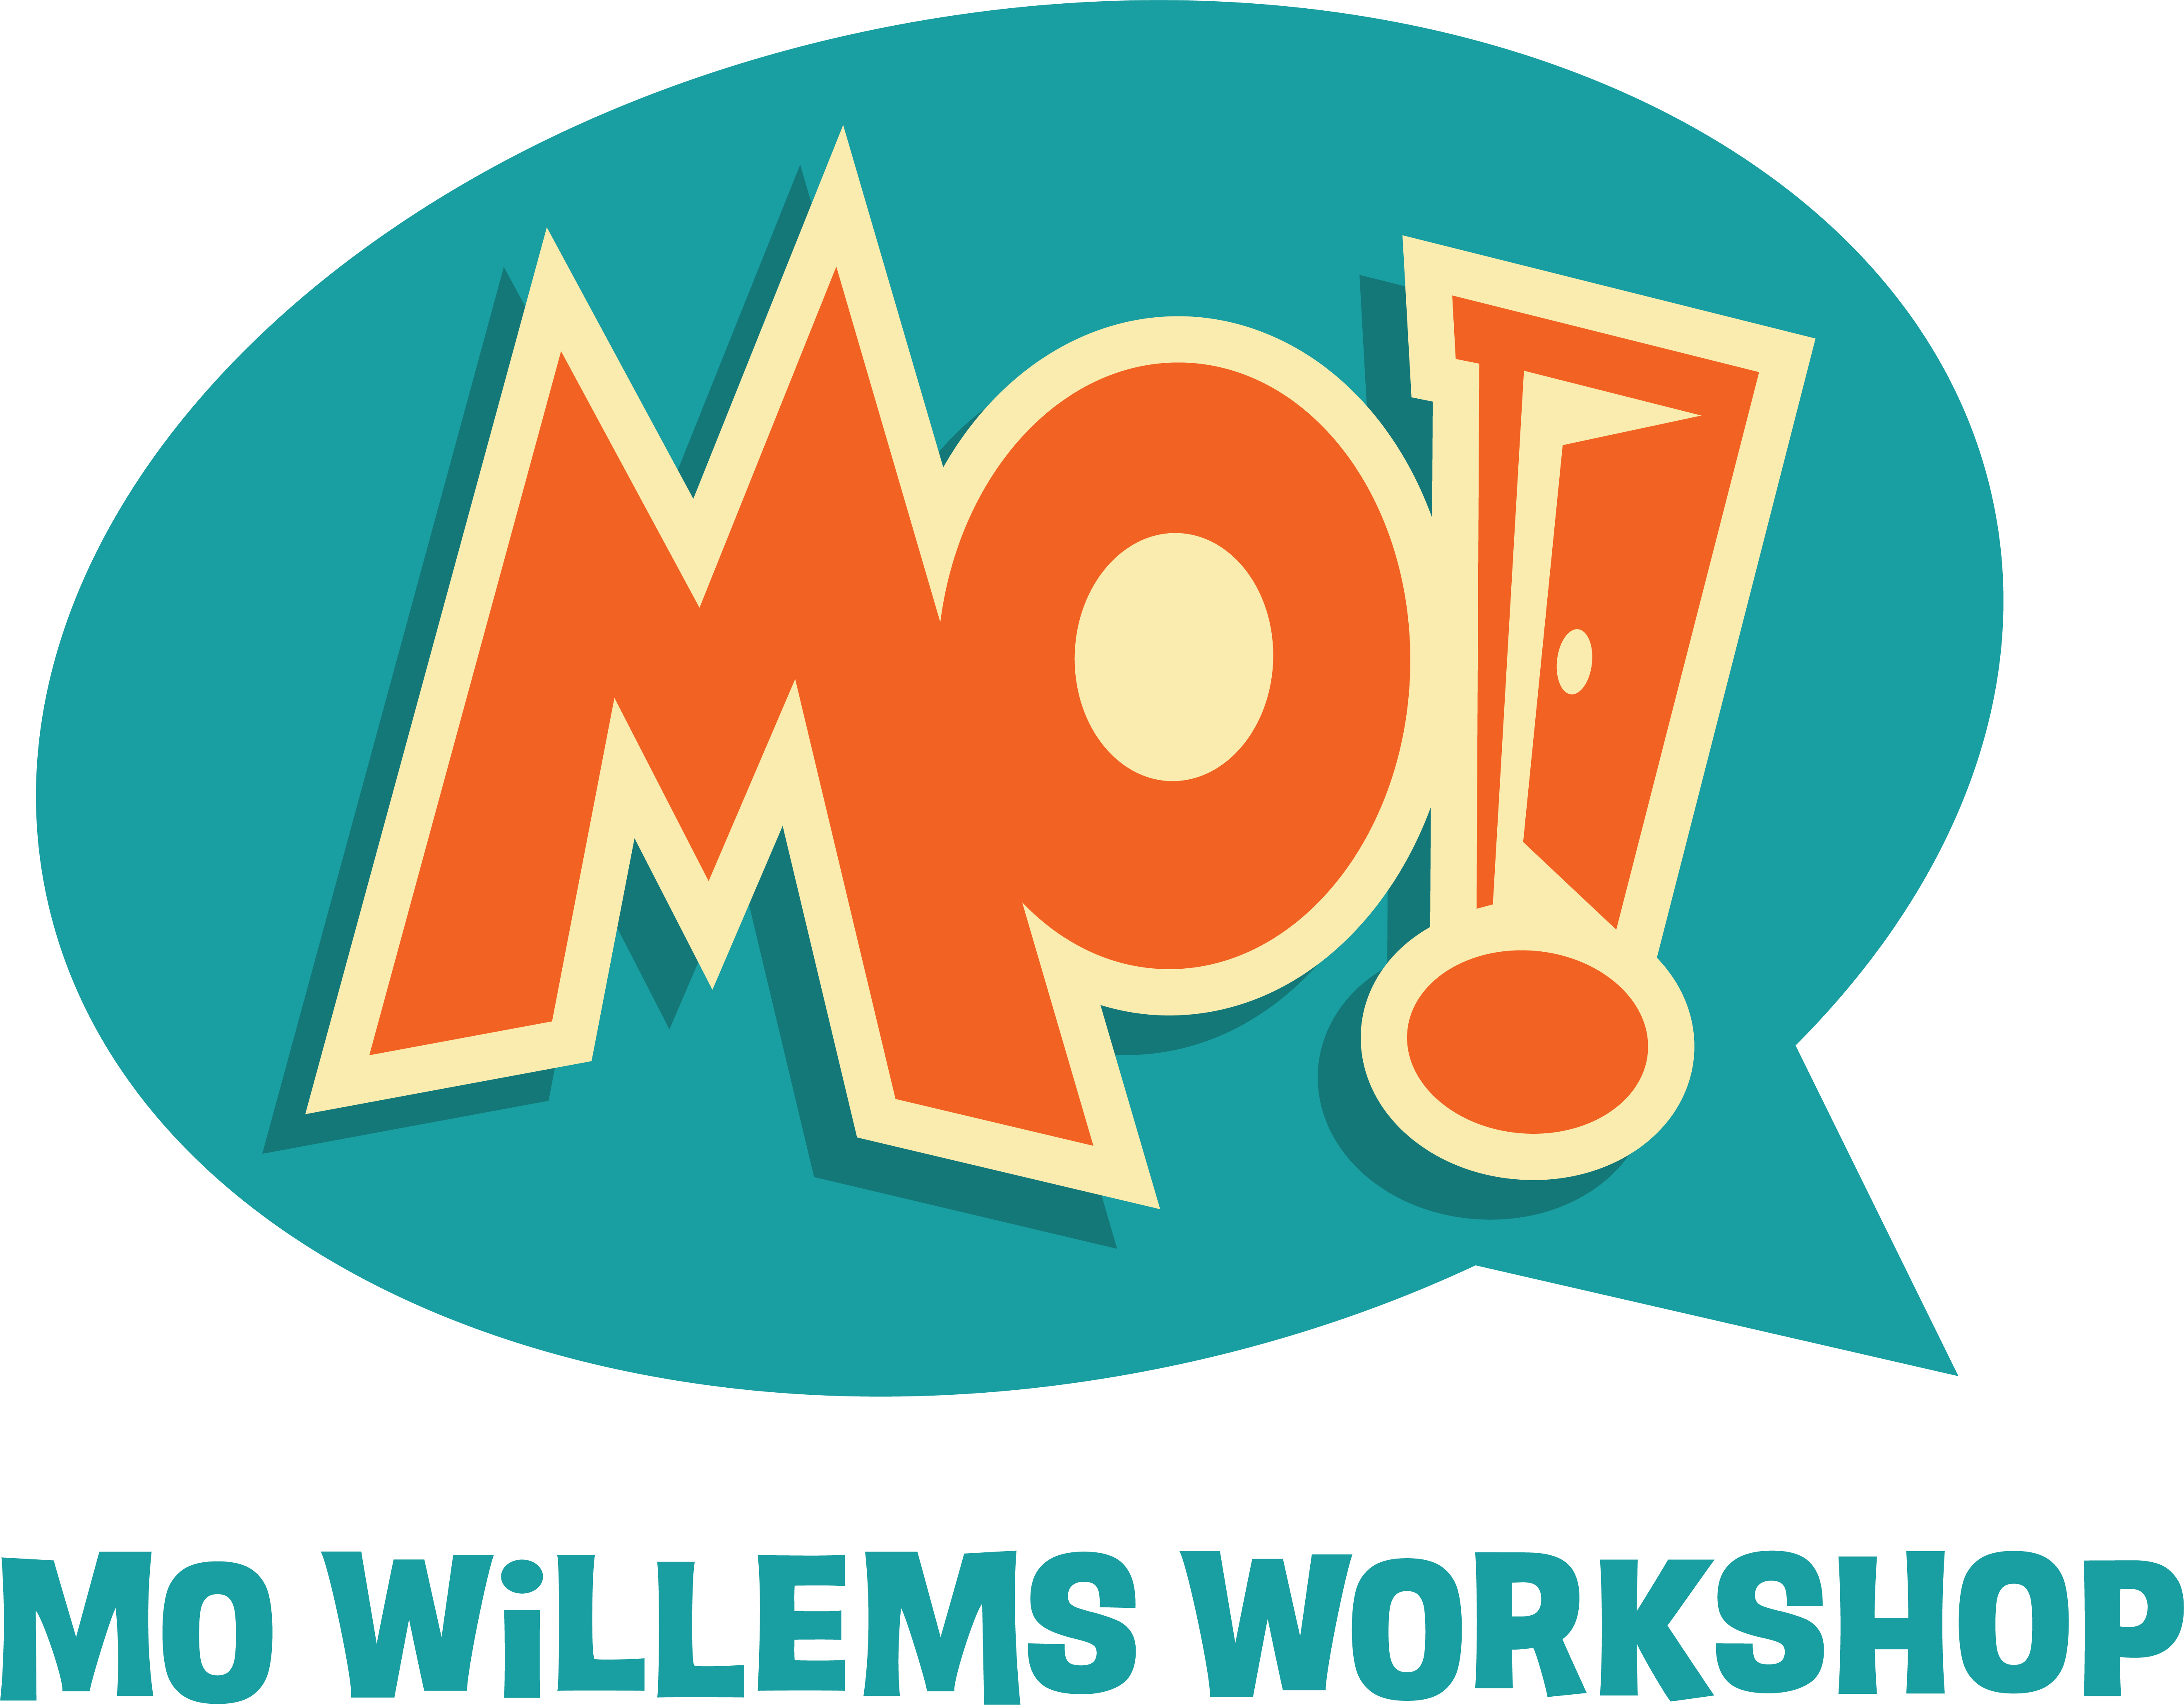 The Mo Willems Workshop